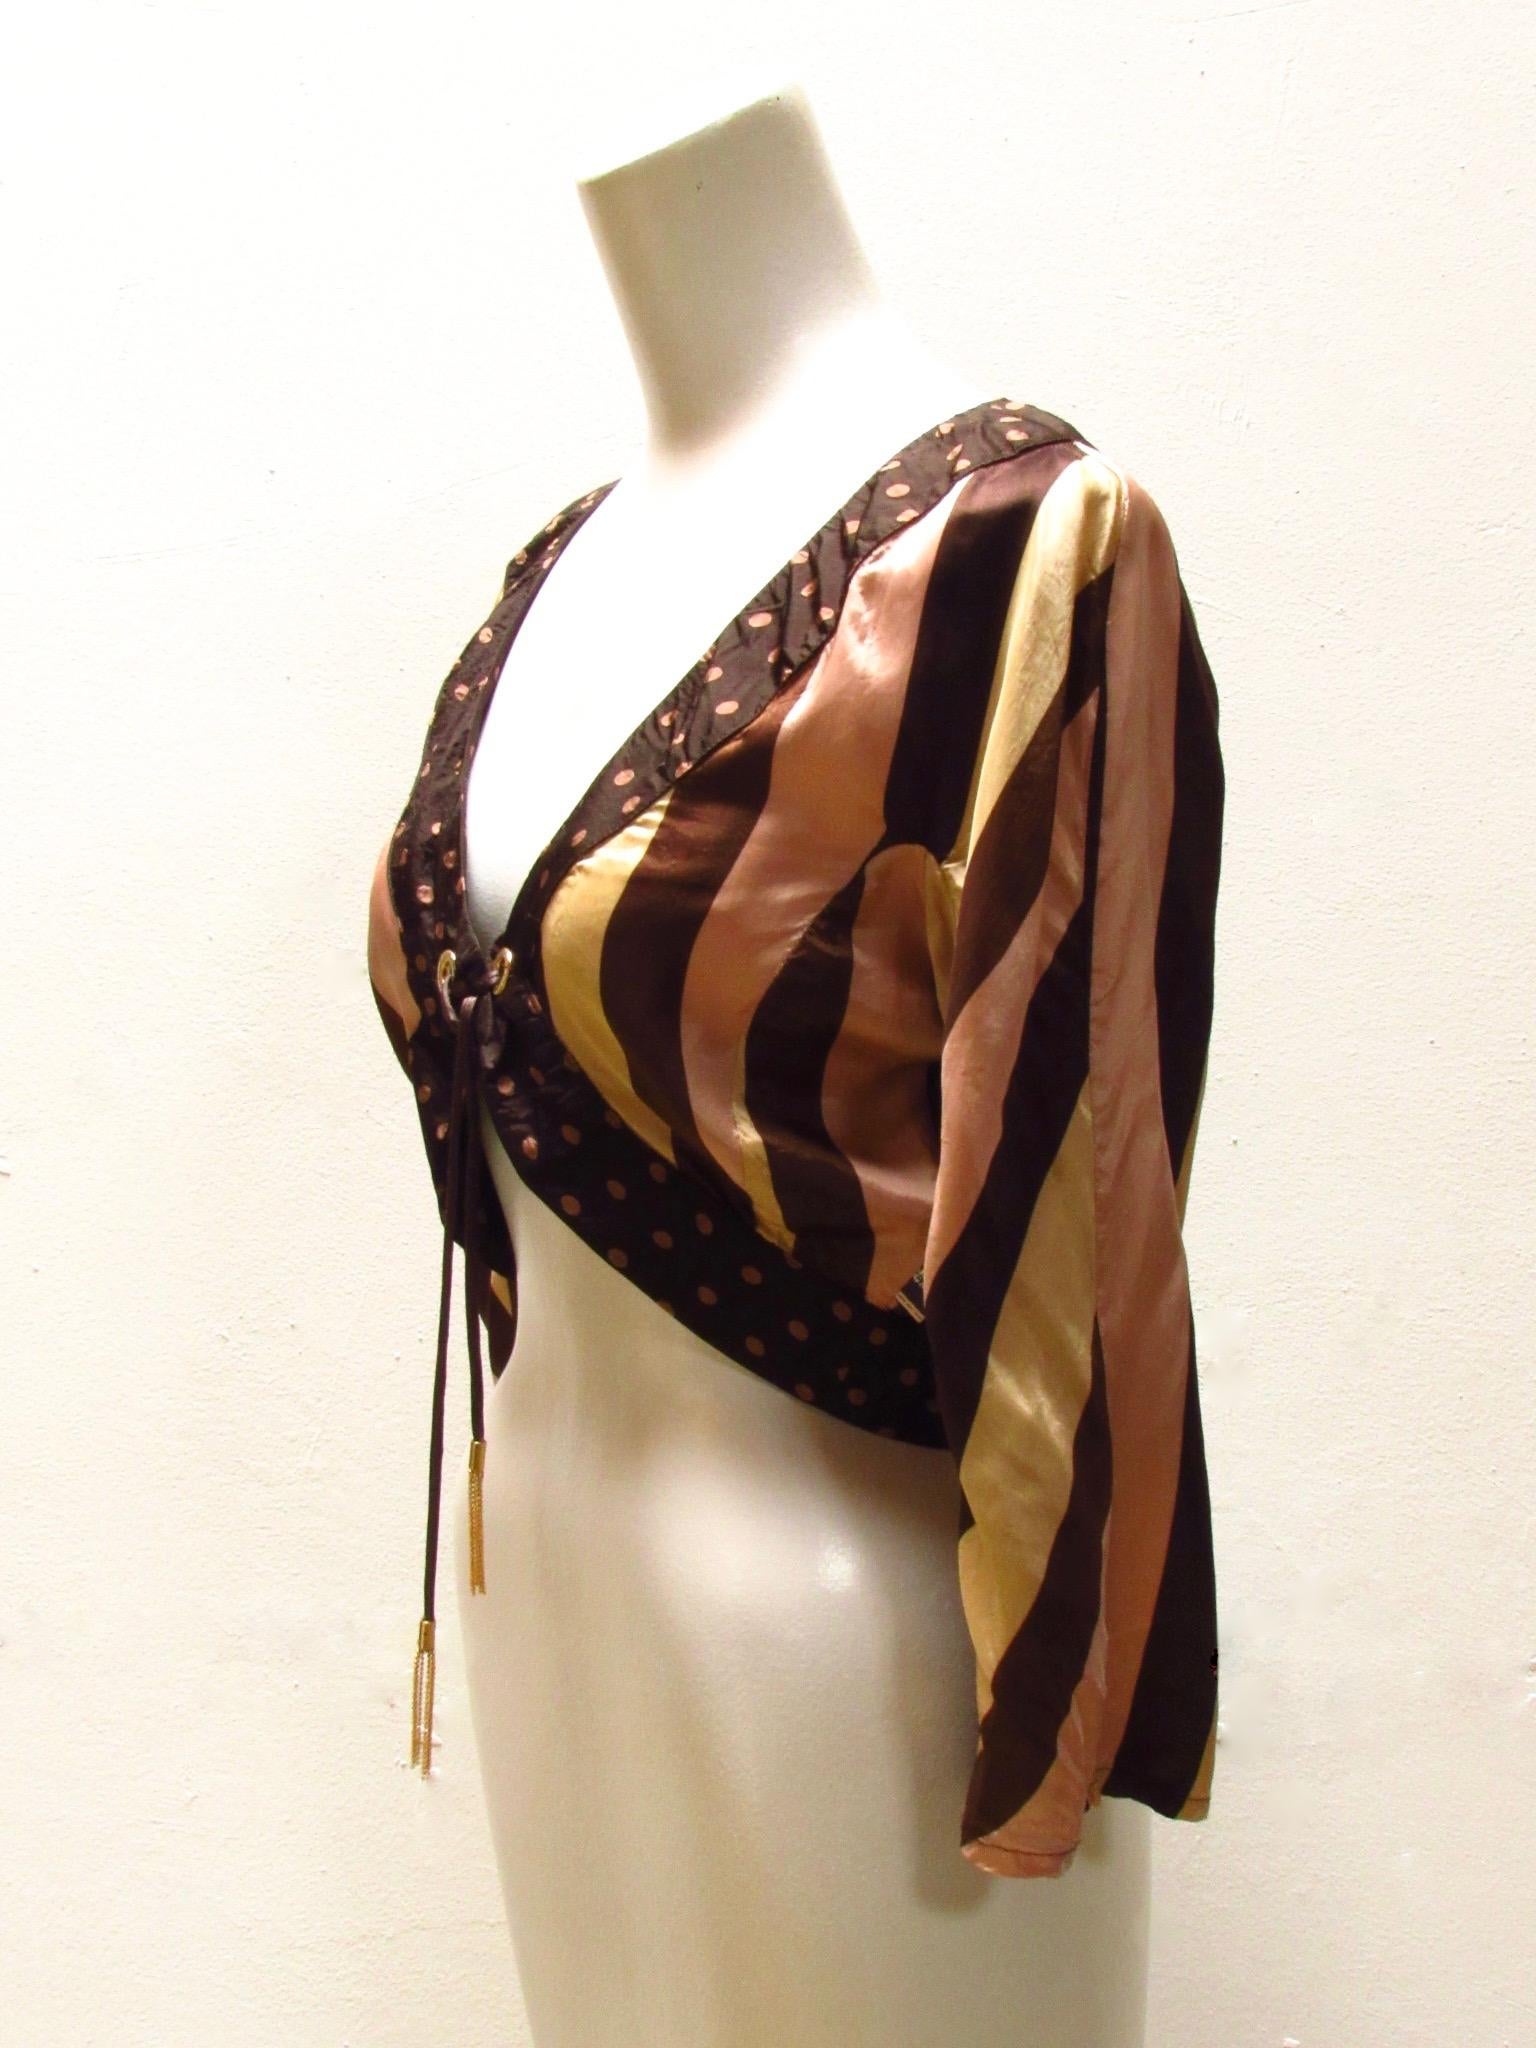 This darling silky soft shrug-style jacket from vintage Jean Paul Gaultier is a chocolate brown color with pink polka dot edging and a striped bodice. The front is secured with a delicate self-fabric tie finished with dangling brass chain, fed